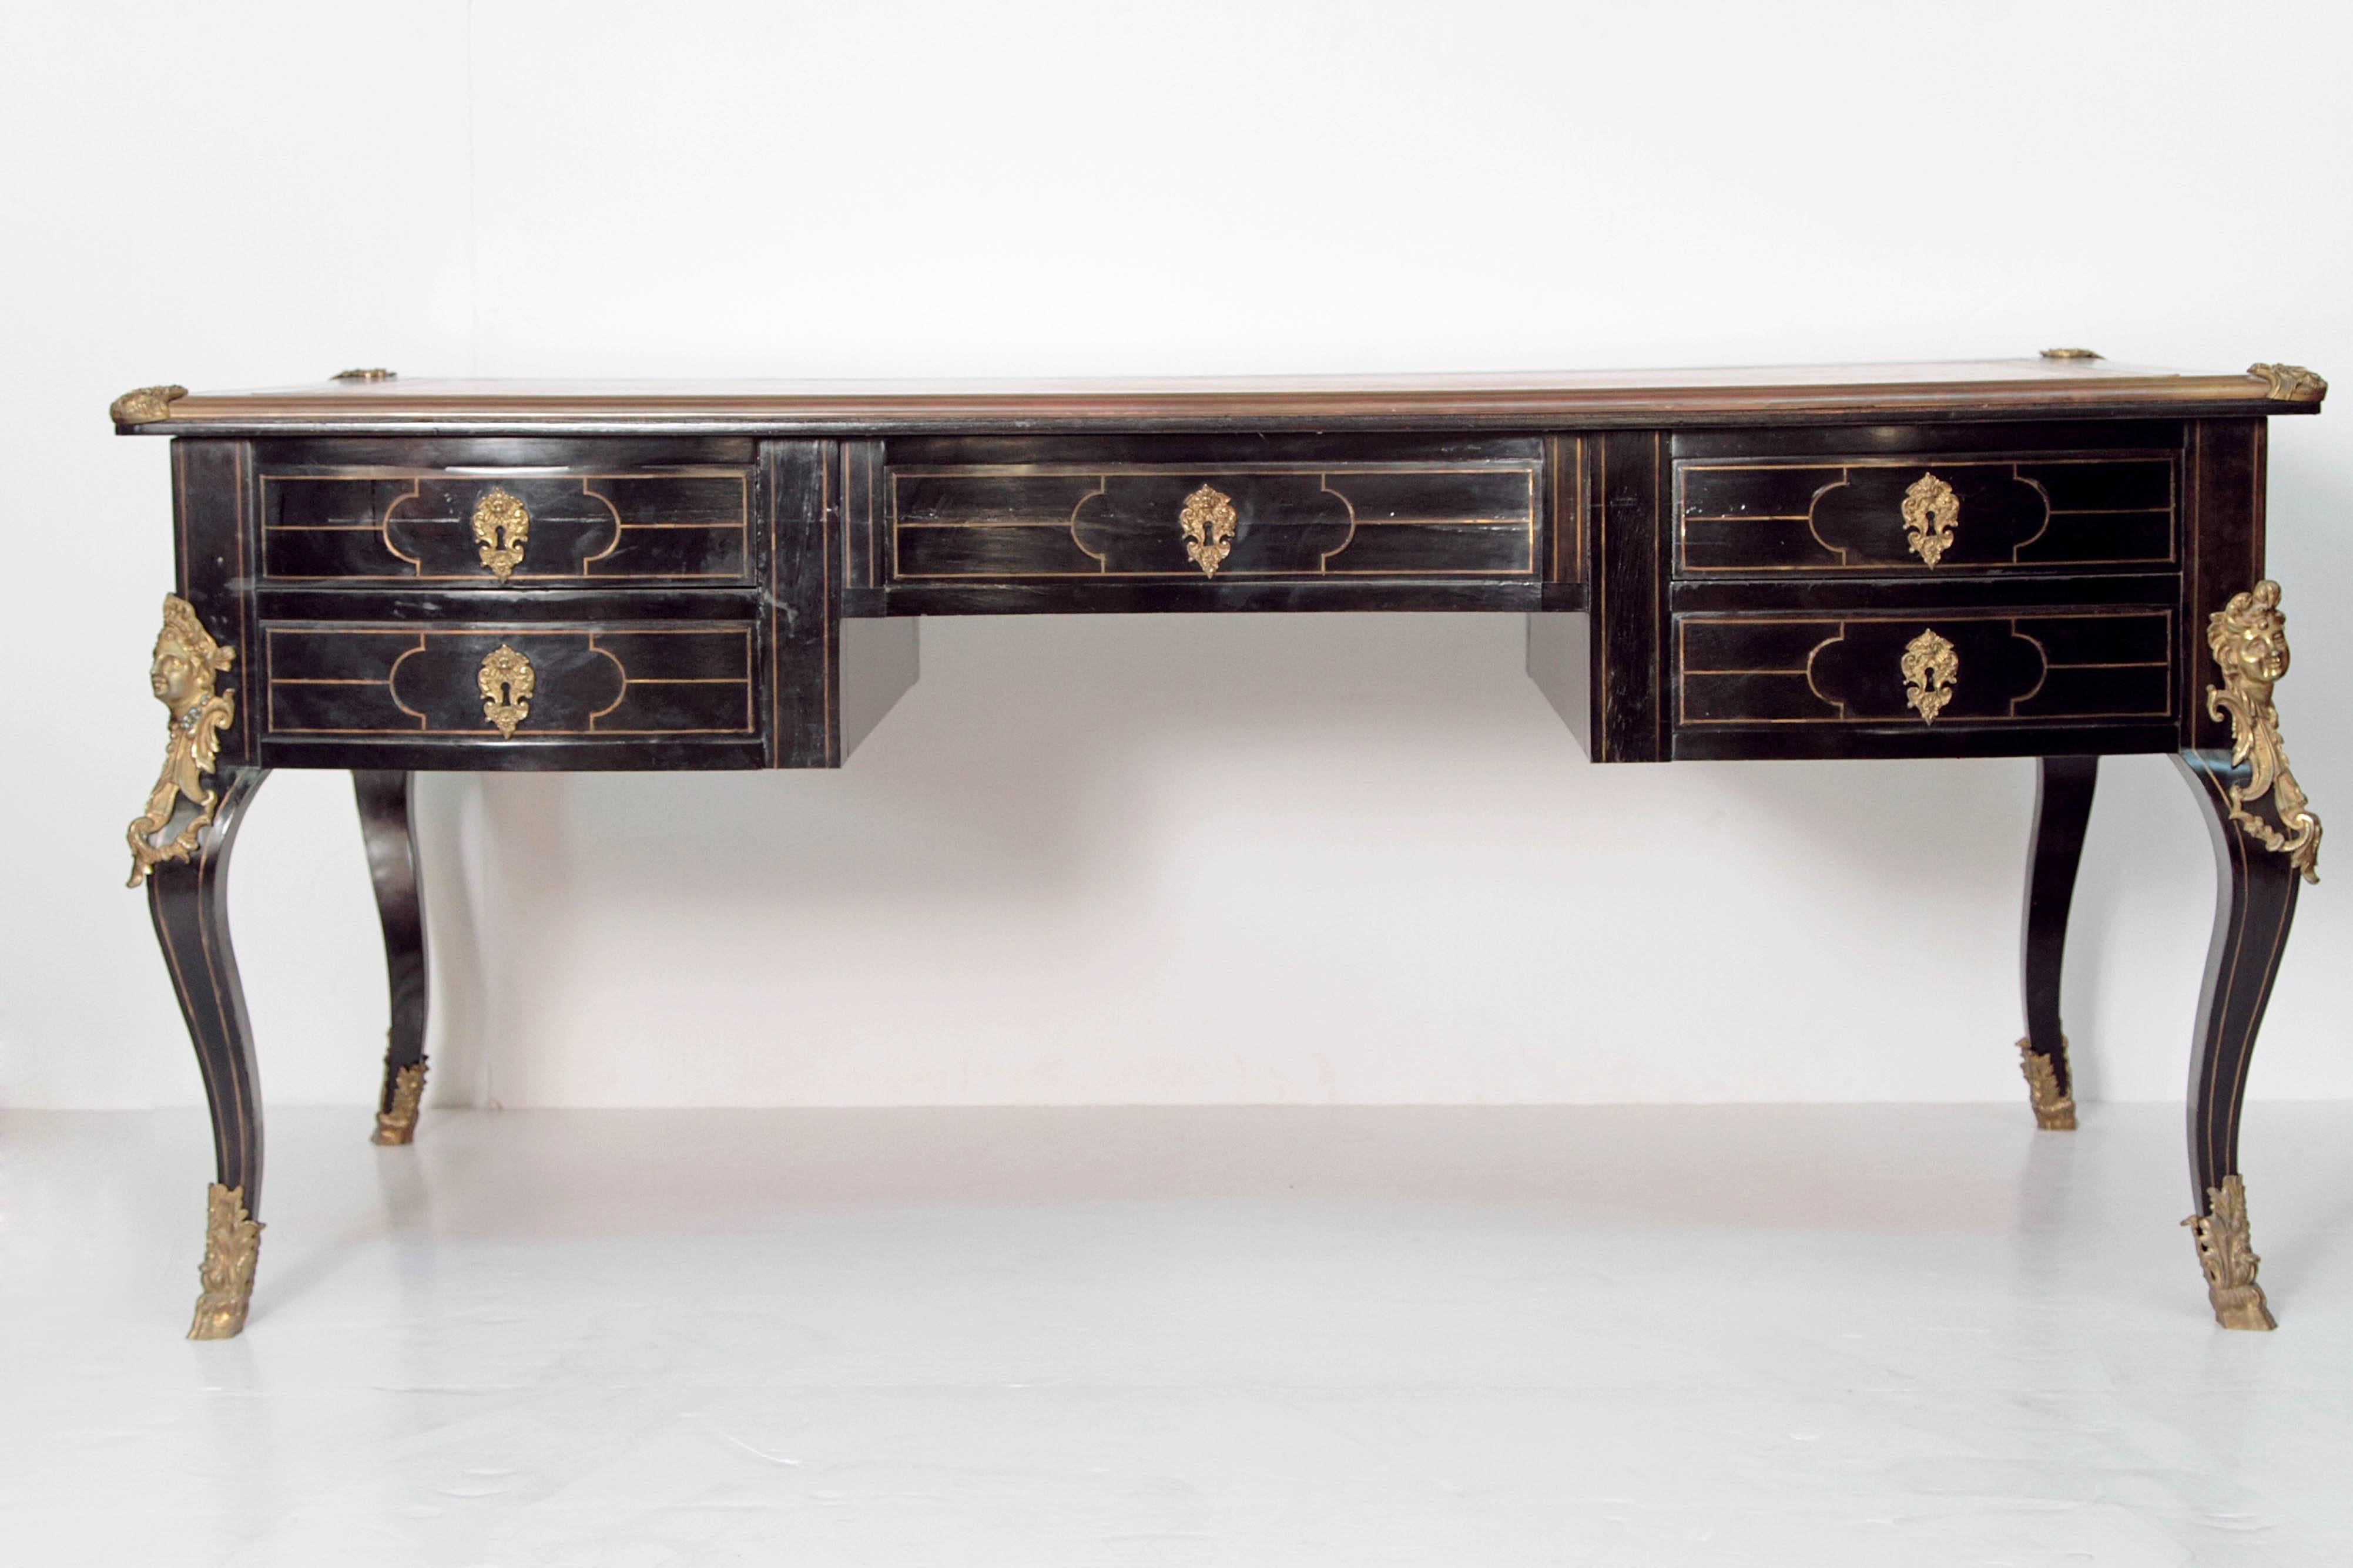 A sturdy and substantial 19th century French bureau plat, Louis XV style, black lacquer with gilt bronze mounts, keyhole eschuchions, and gilt decoration / detail, tan leather writing surface with embossed and gilded border, two drawers on either